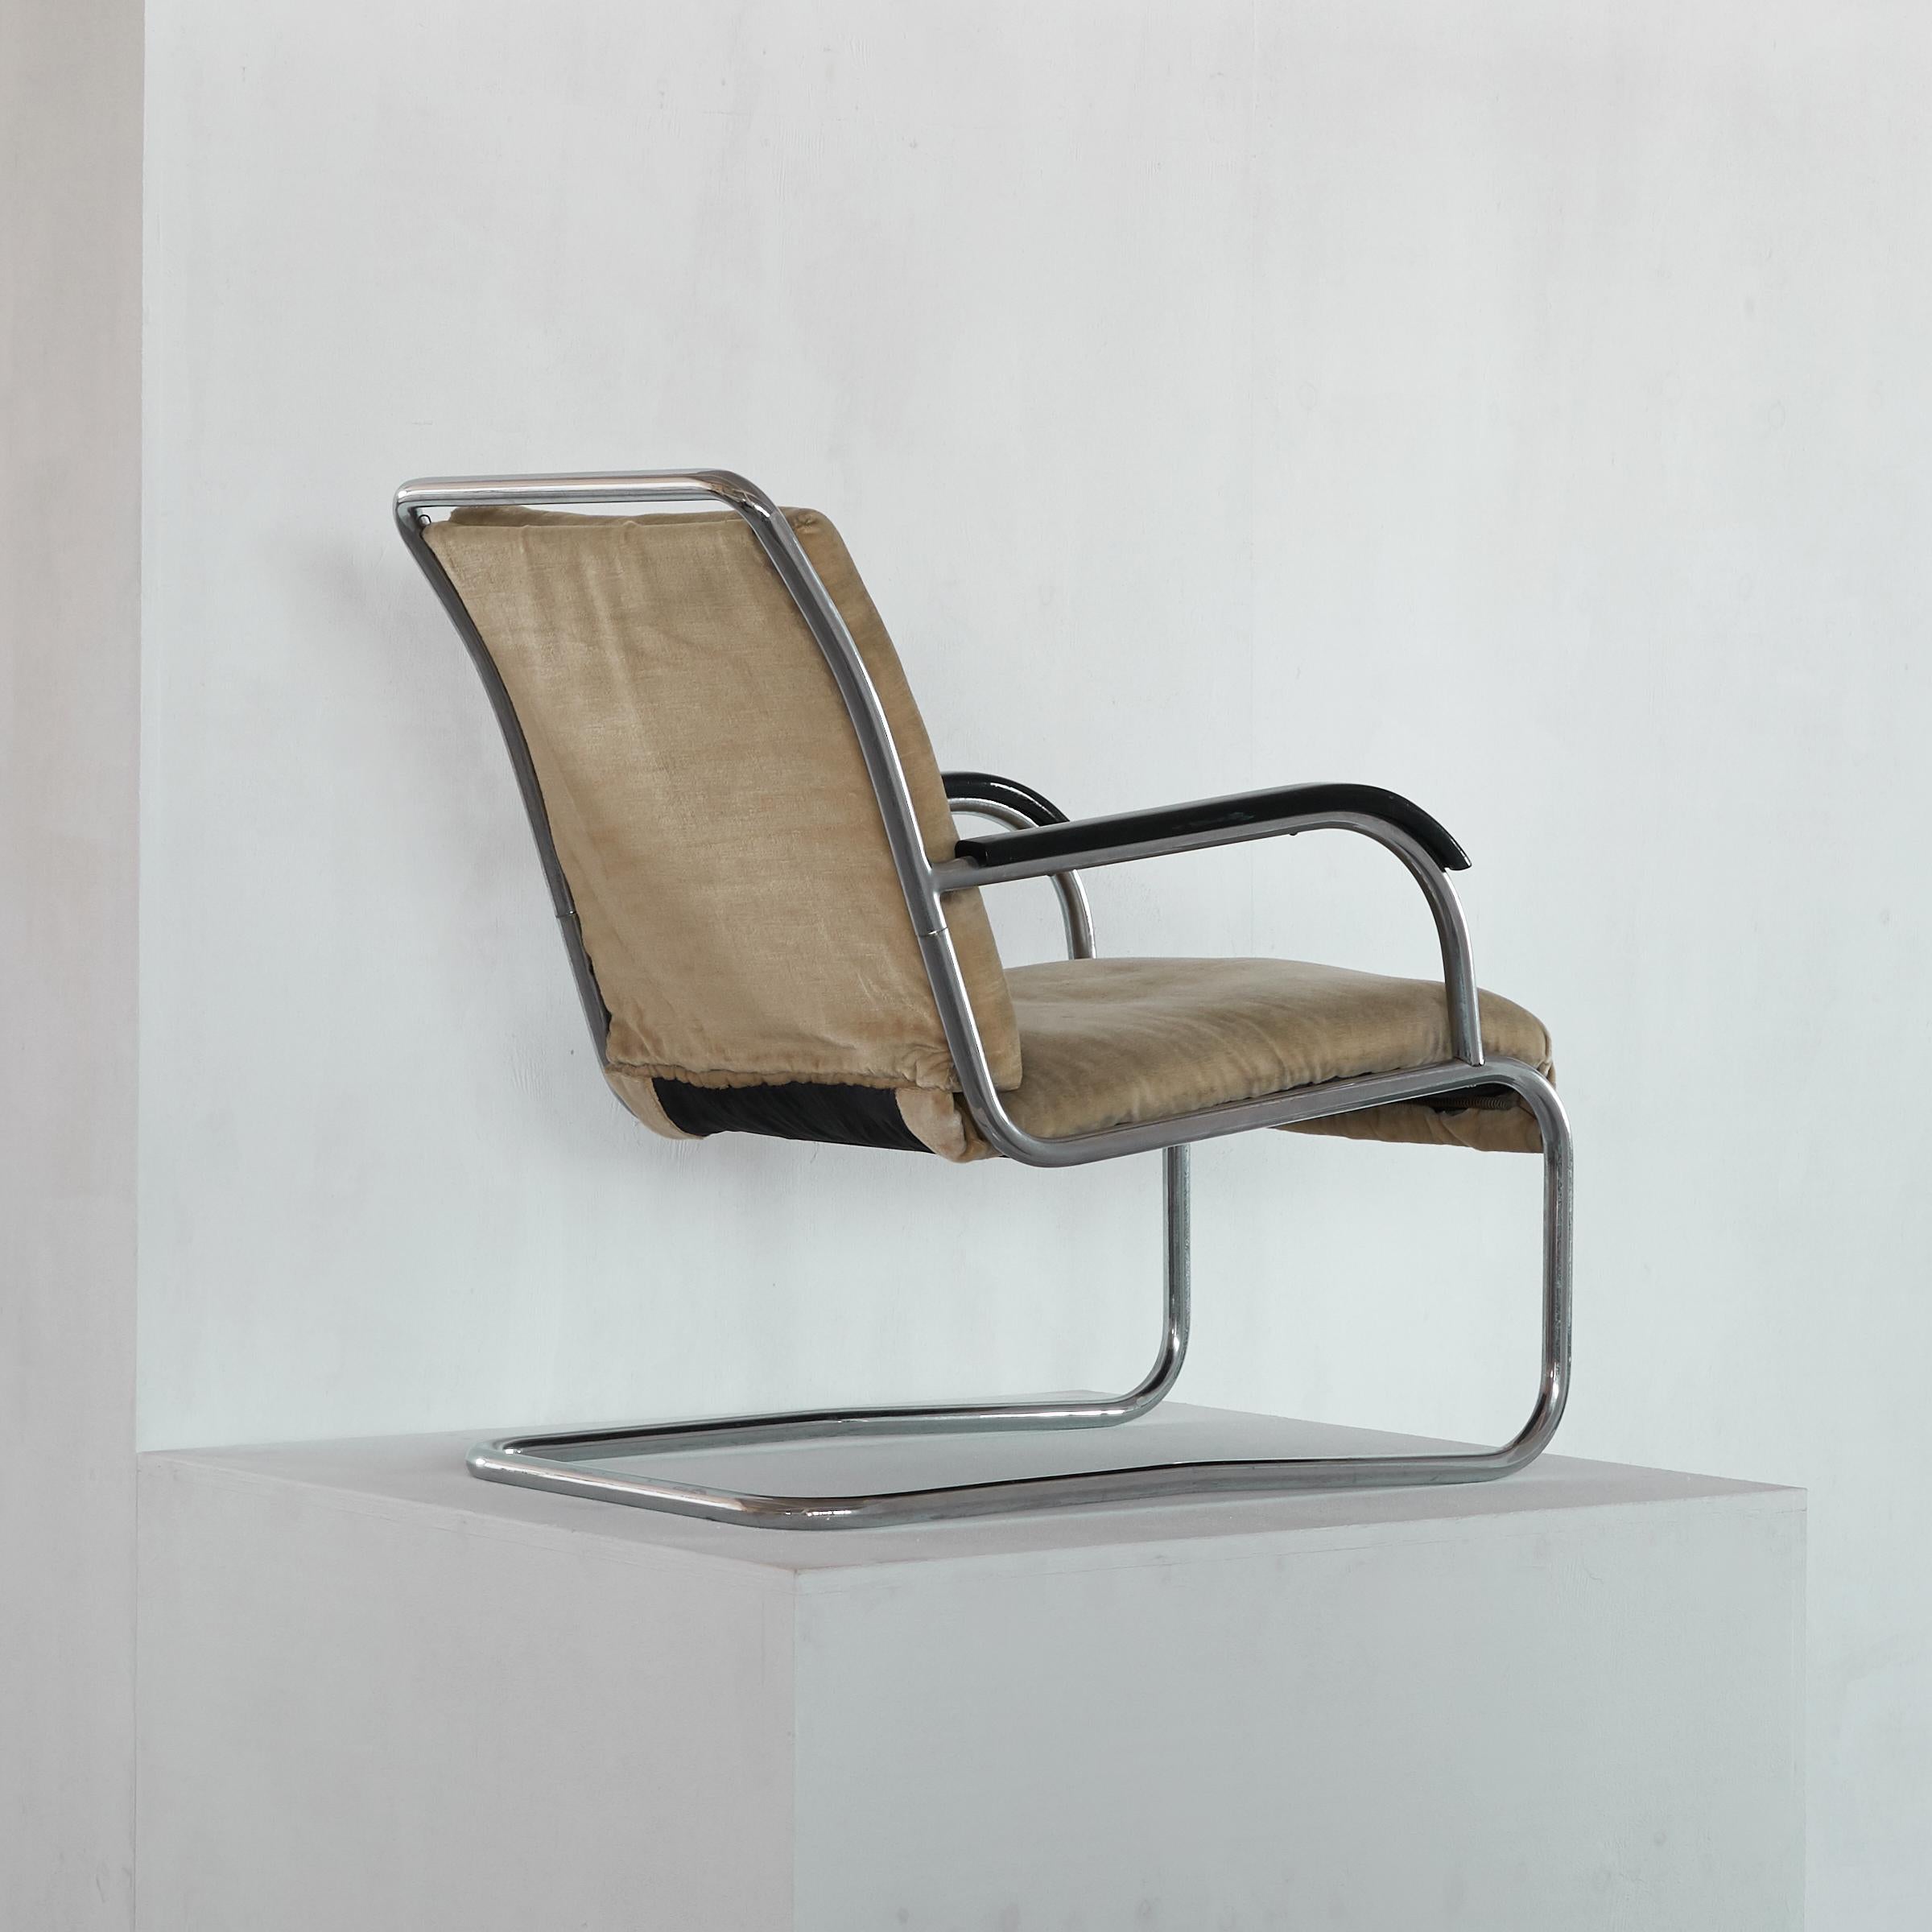 Dutch Early Cantilever Lounge Chair by Paul Schuitema For Sale